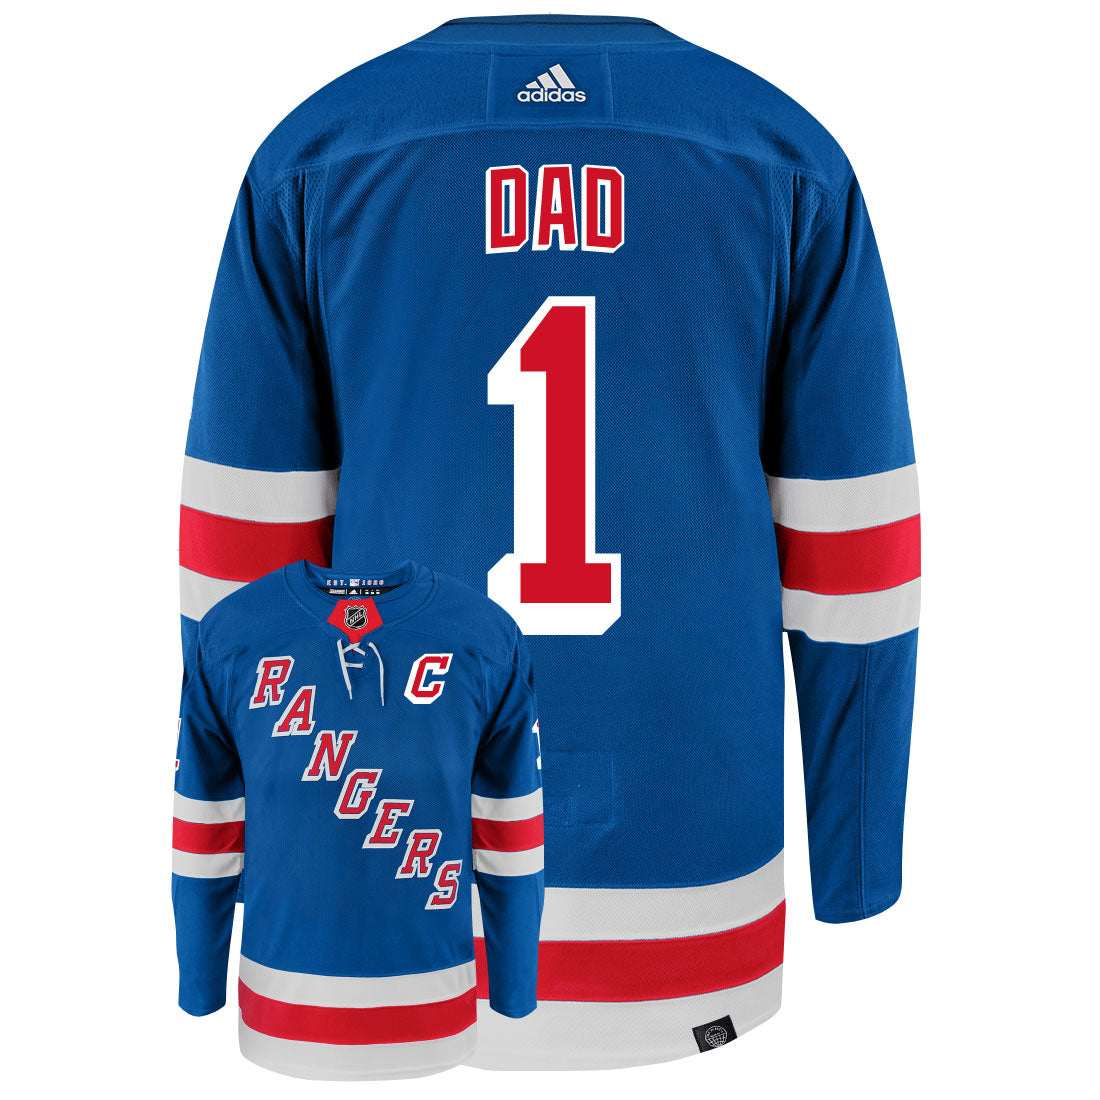 New York Rangers Dad Number One Adidas Primegreen Authentic NHL Hockey Jersey